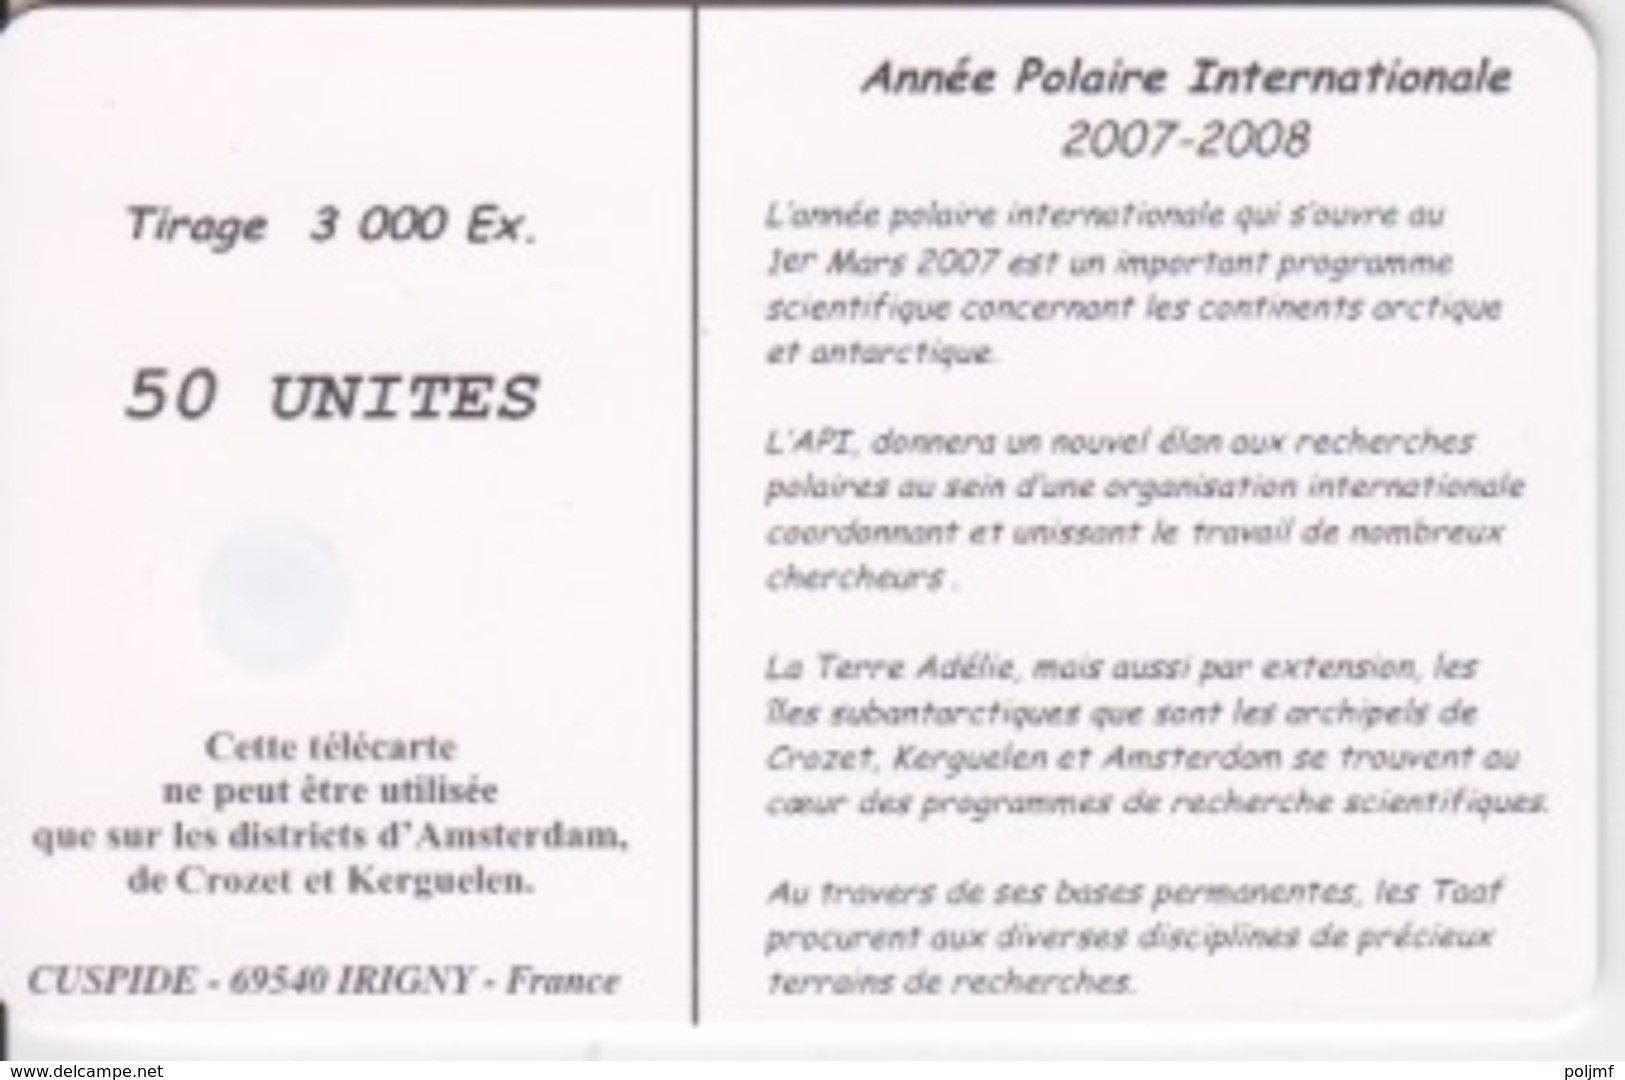 Télécarte 50U, Tirage 3000, Année Polaire Internationale 2007-2008 (Iceberg) - TAAF - French Southern And Antarctic Lands